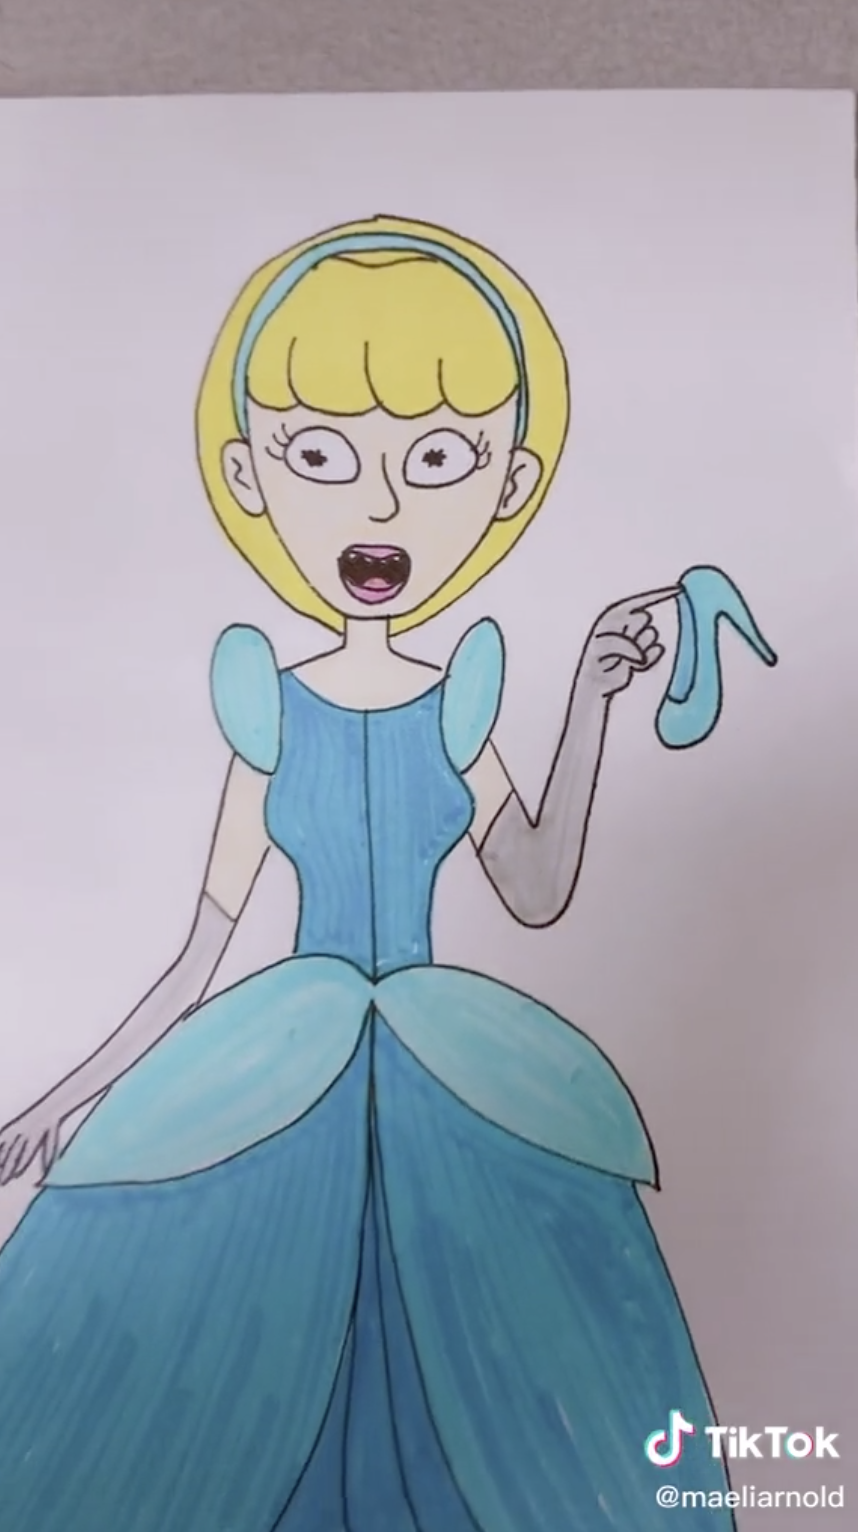 Ricky and Morty characters as Cinderella.